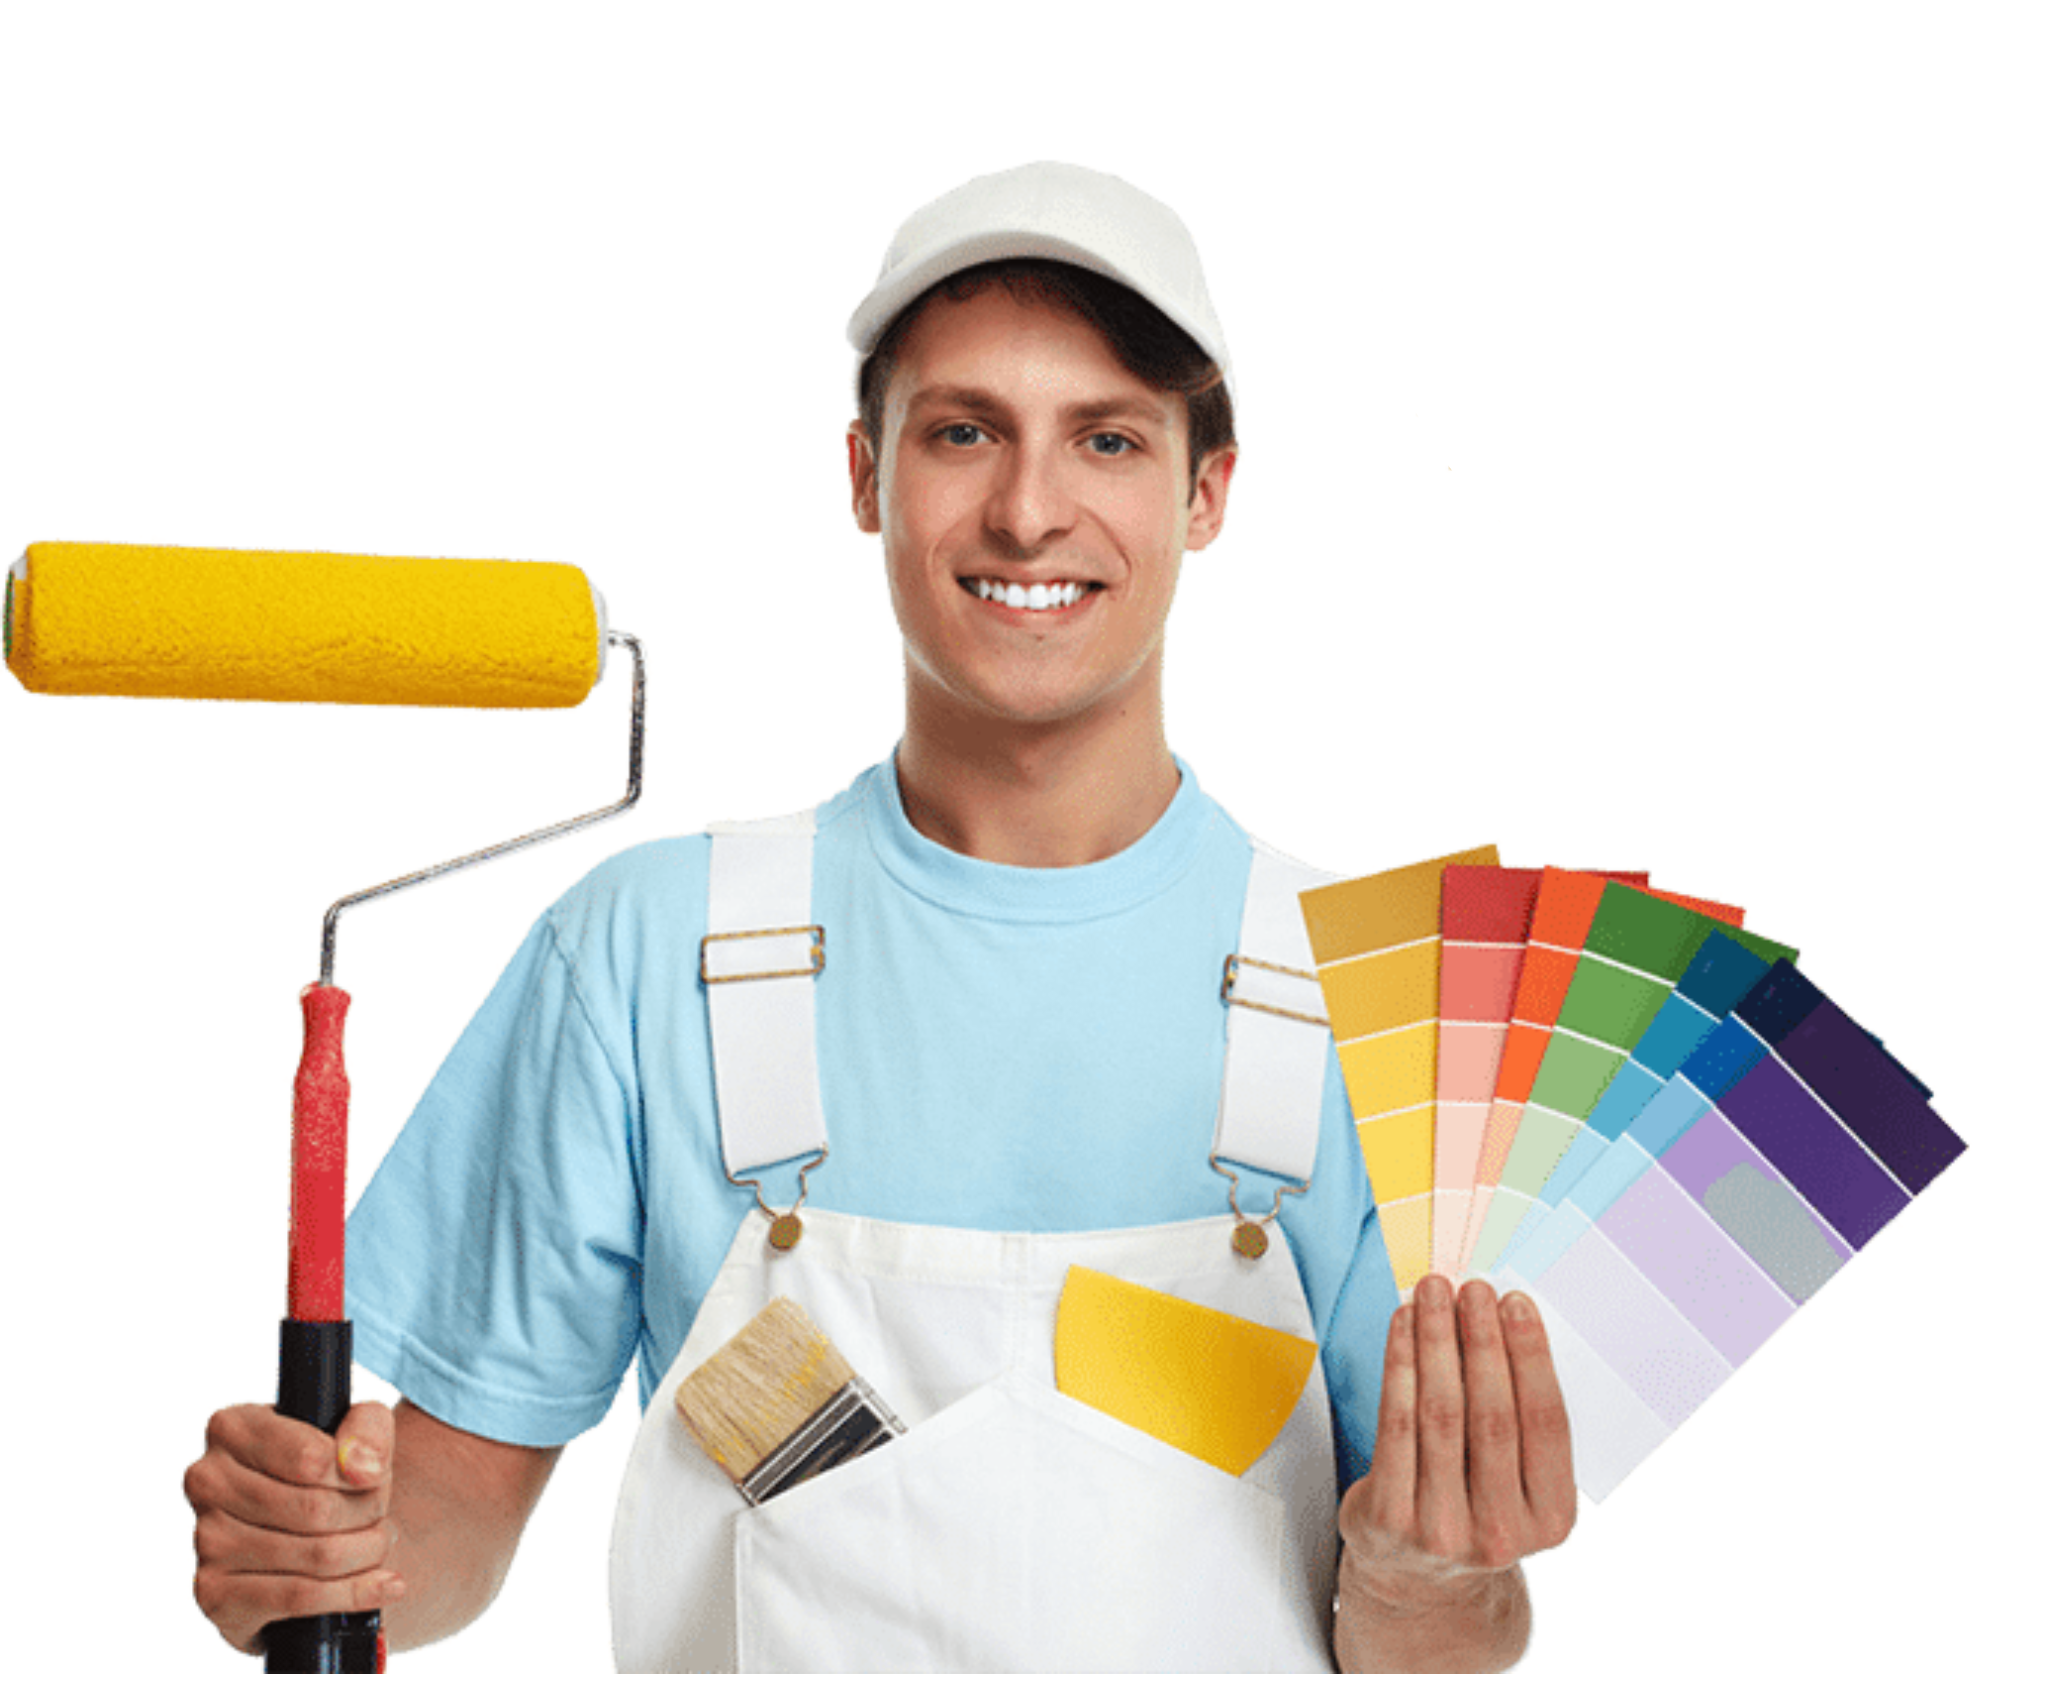 Hanover Painting Contractor